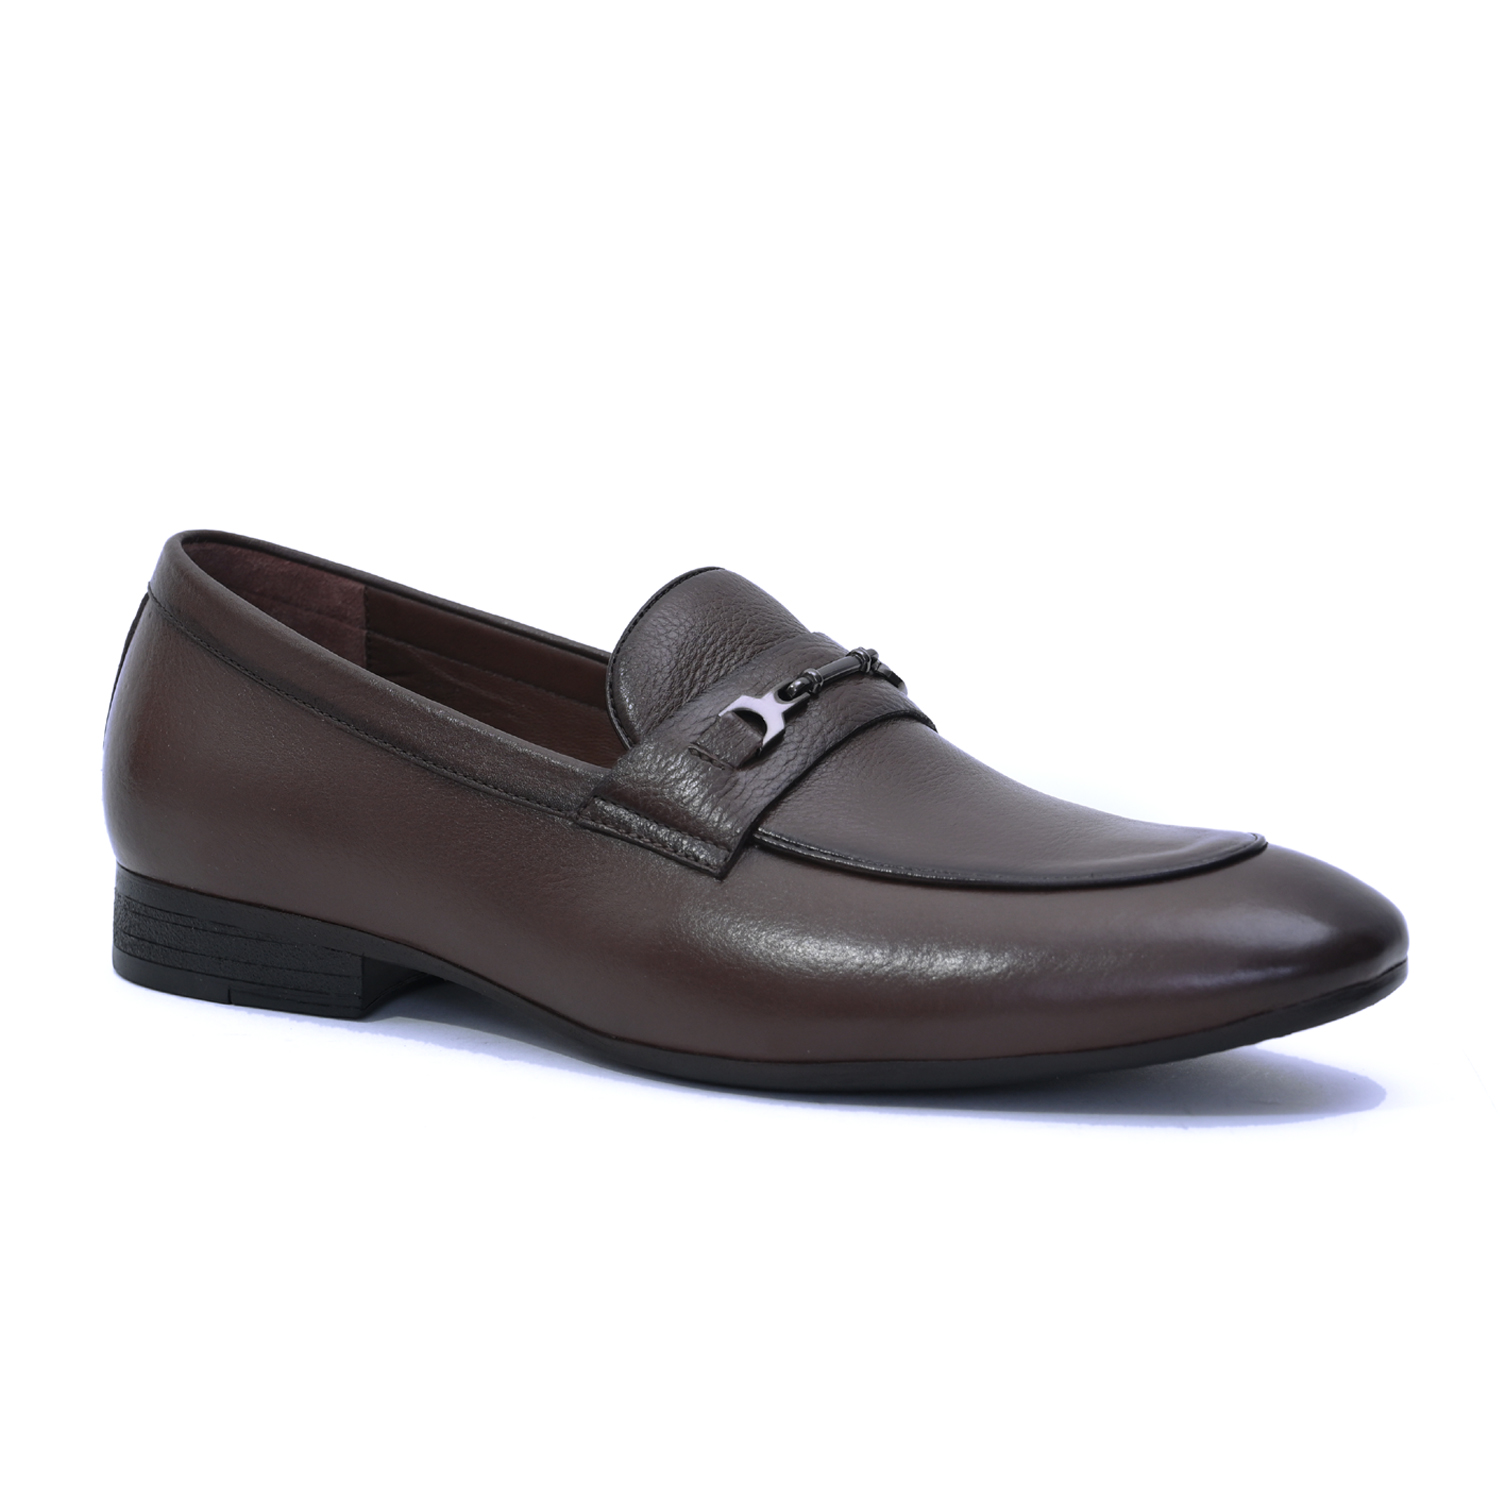 Buy Premium Quality Genuine Leather Shoes Online in India